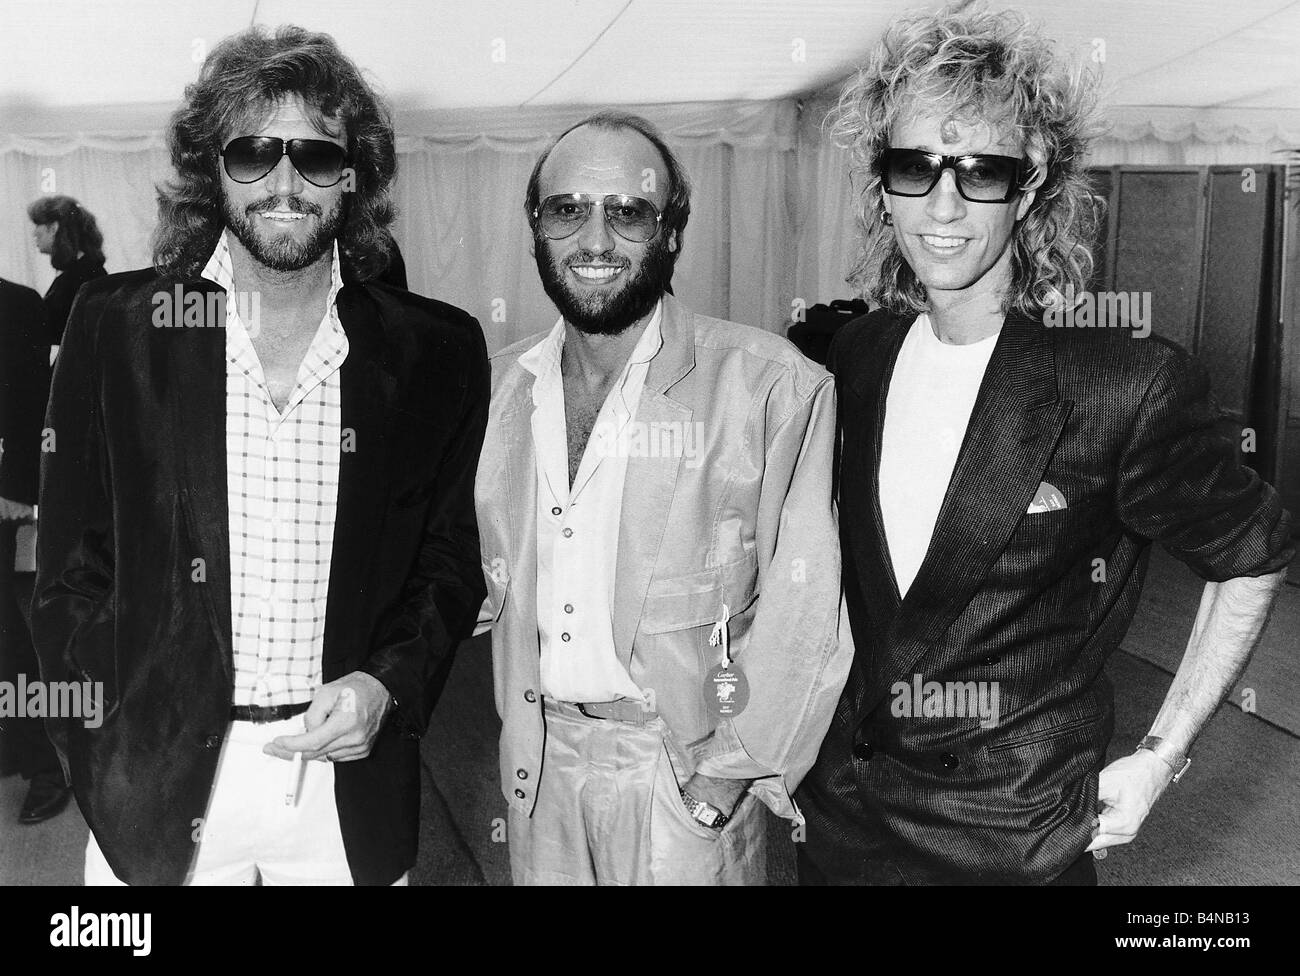 Les Bee Gees Barry Gibb groupe pop 1986 Maurice Gibb Robin Gibb Banque D'Images